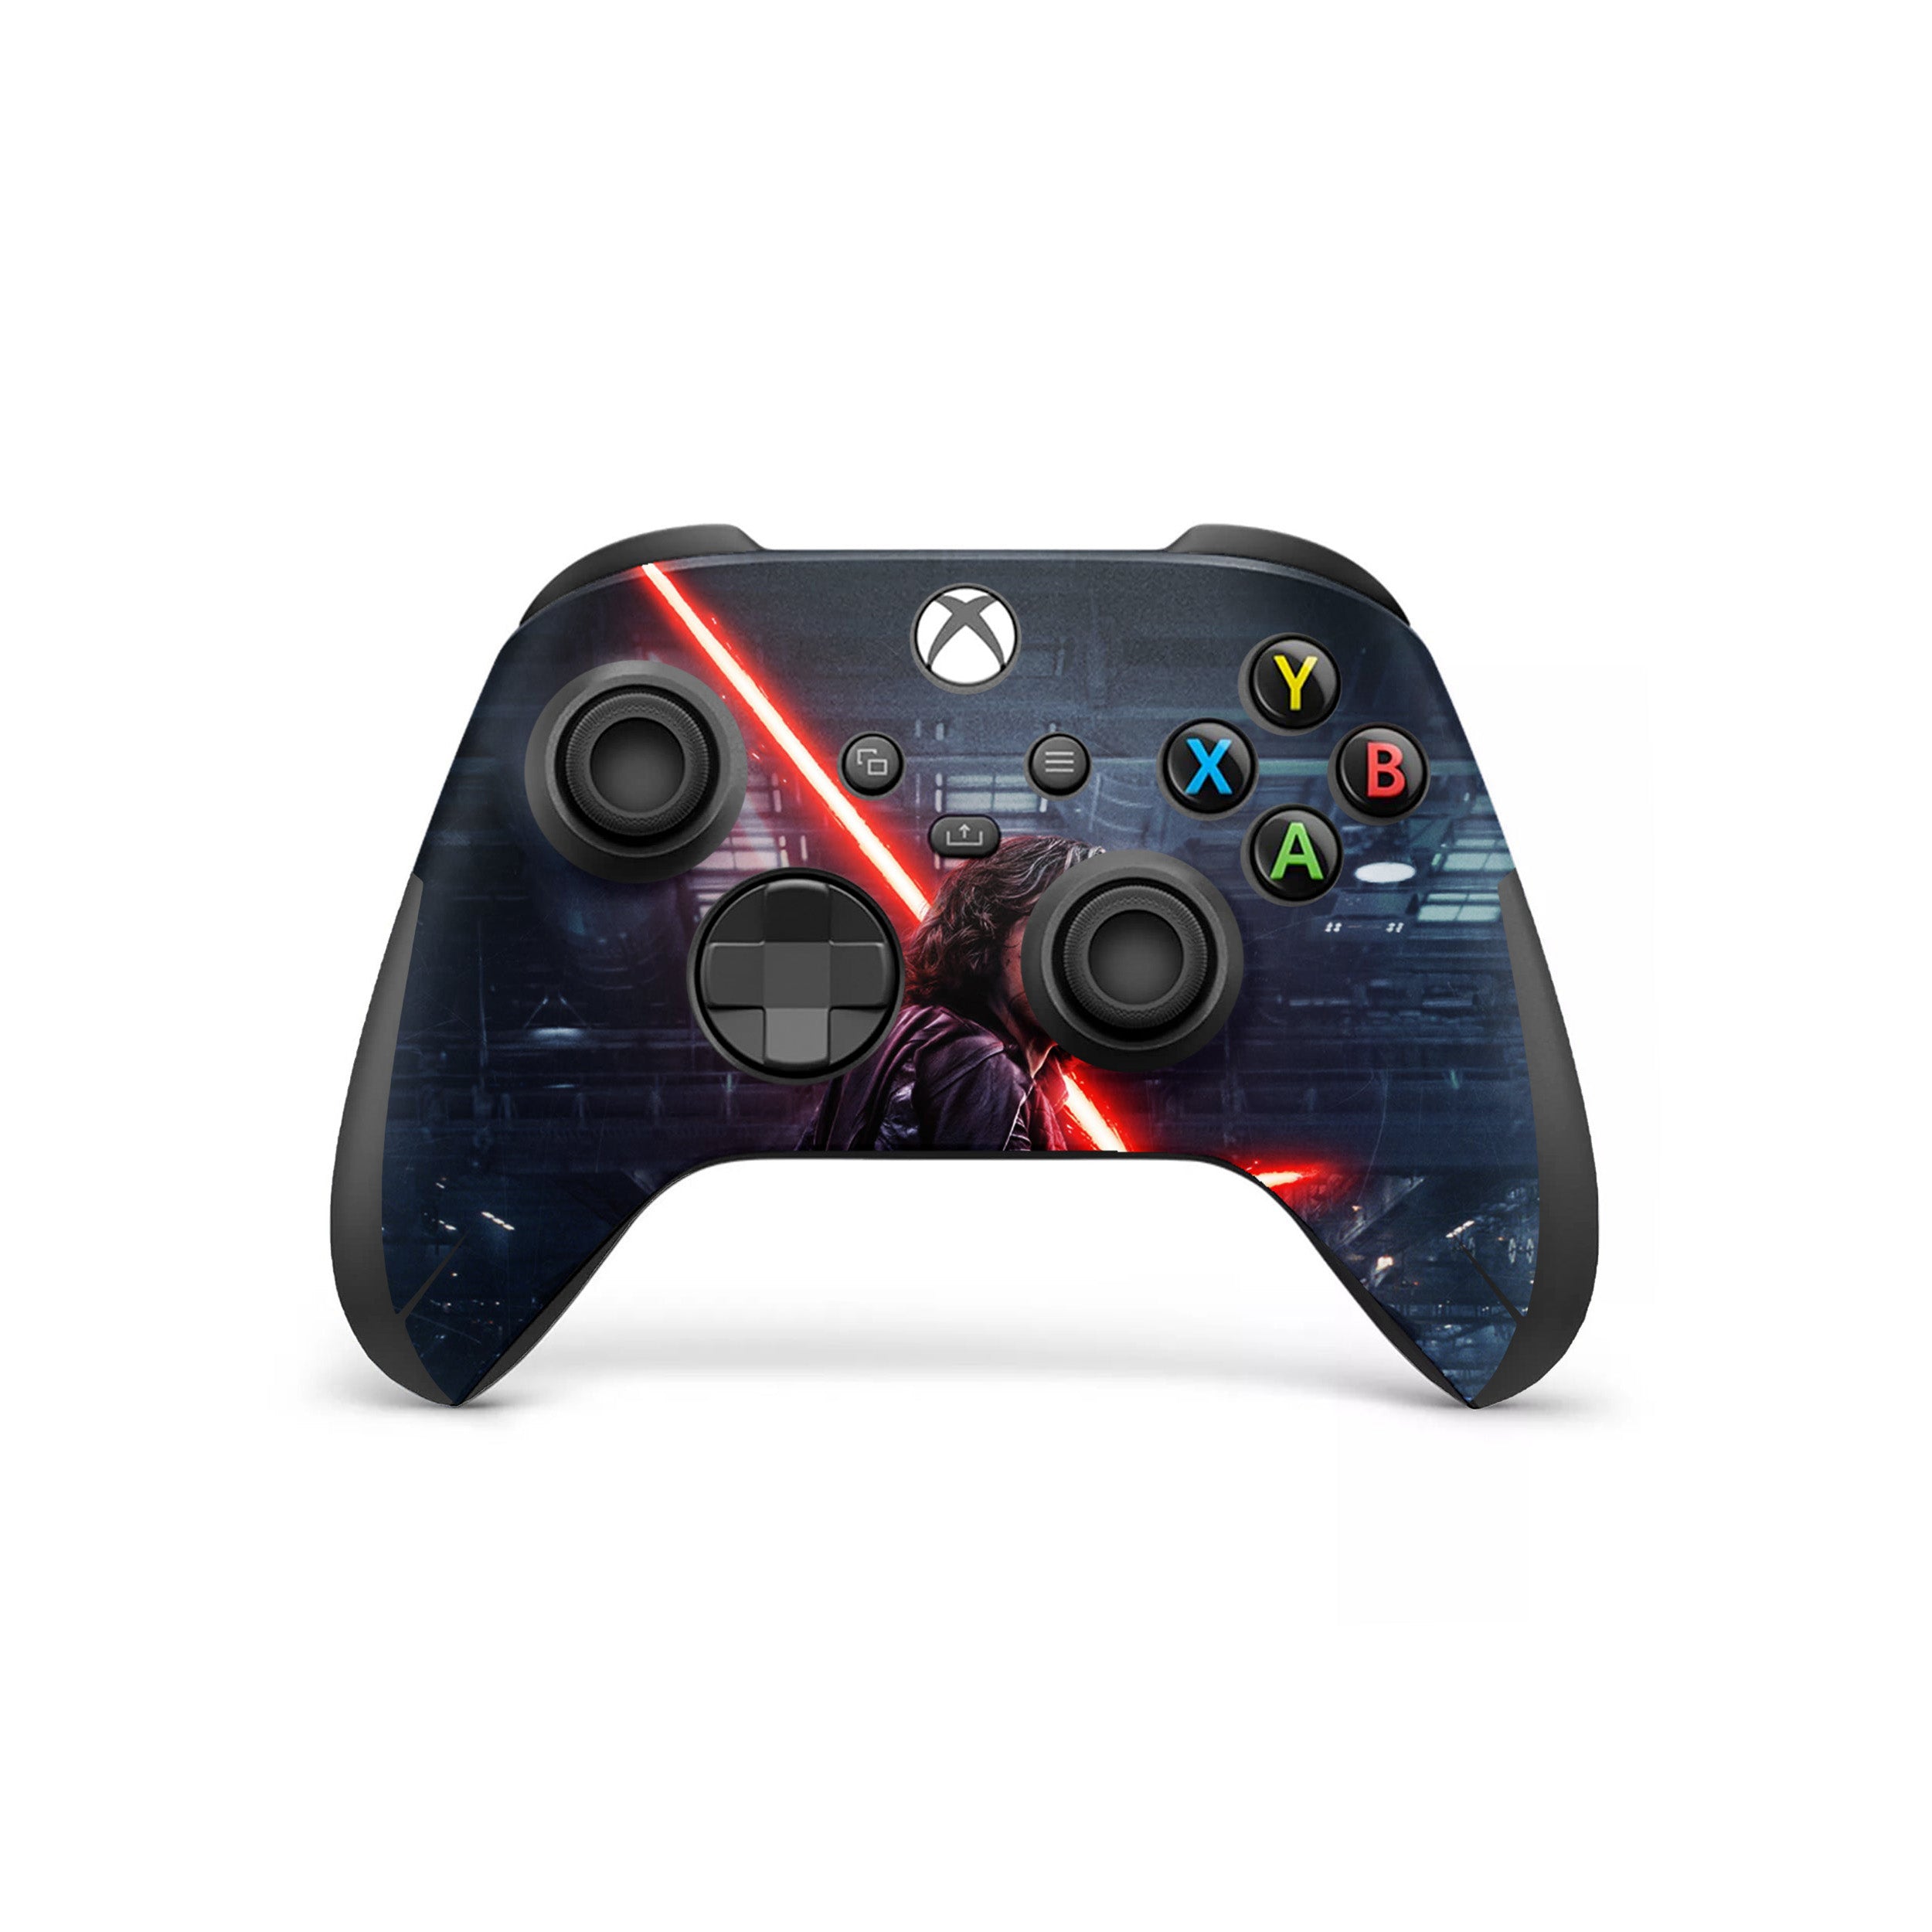 A video game skin featuring a Star Wars Kylo Ren design for the Xbox Wireless Controller.